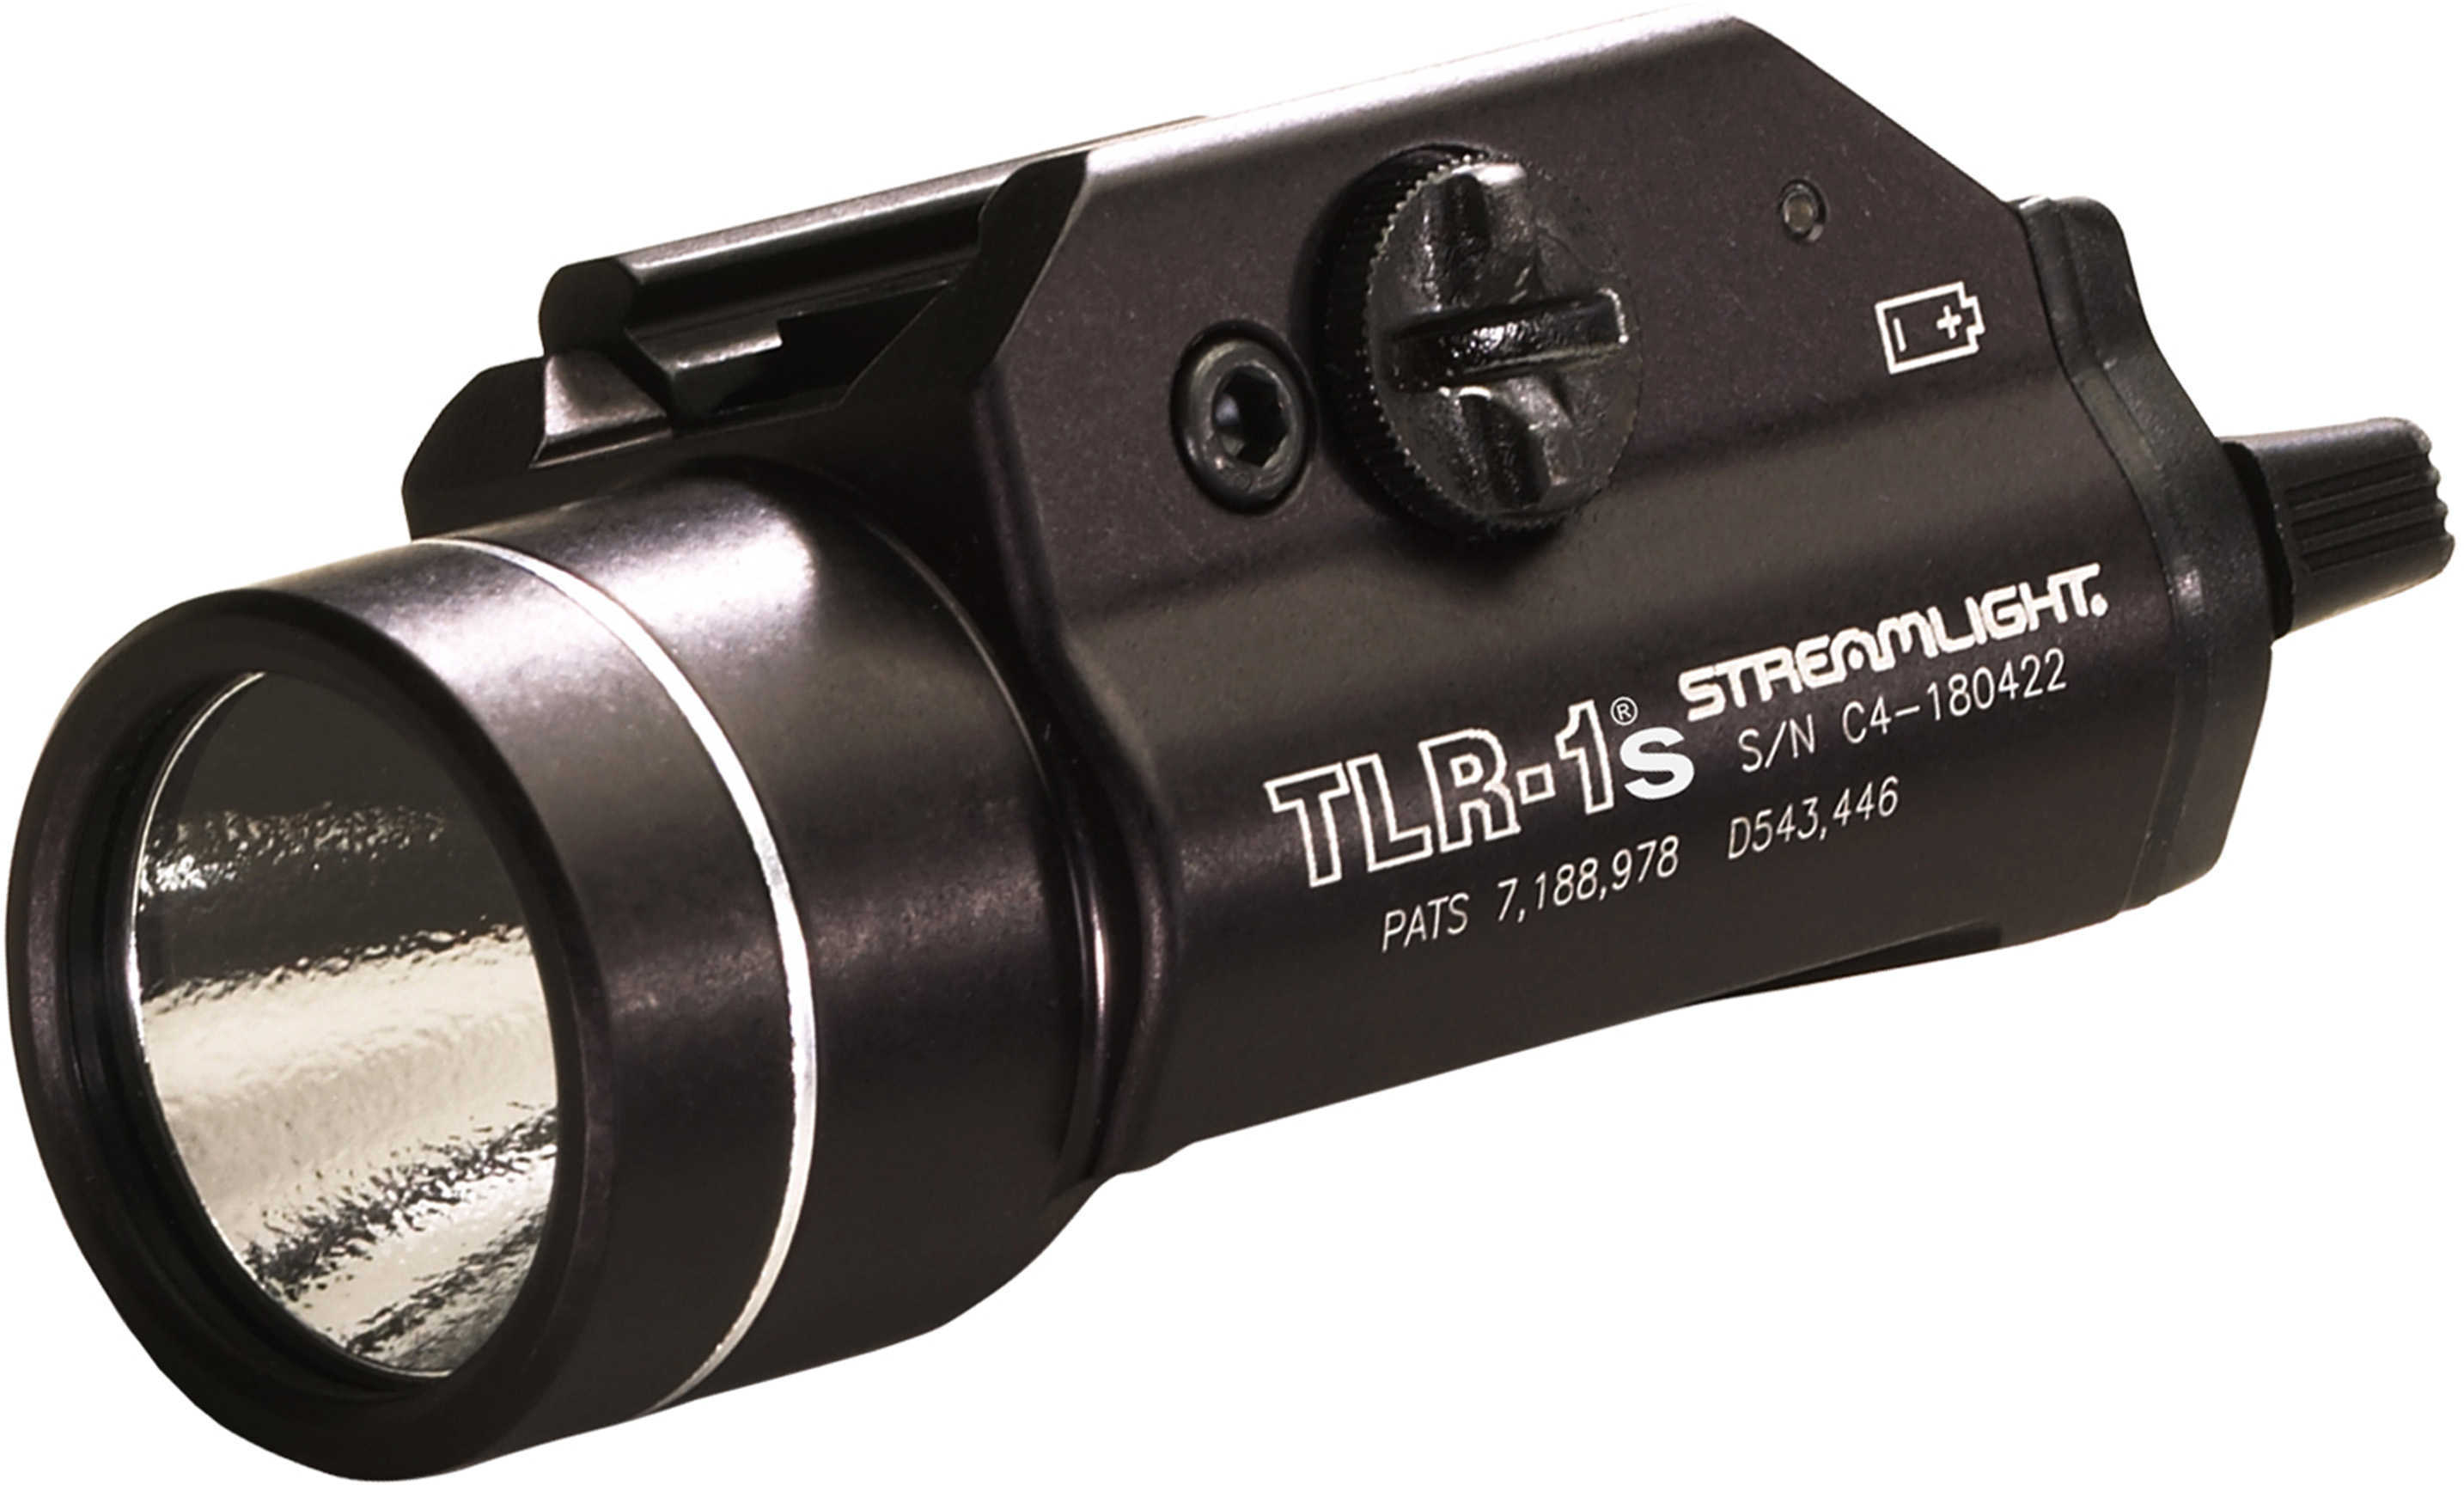 StreamLight TLR-1S Tactical Led Light With Strobe